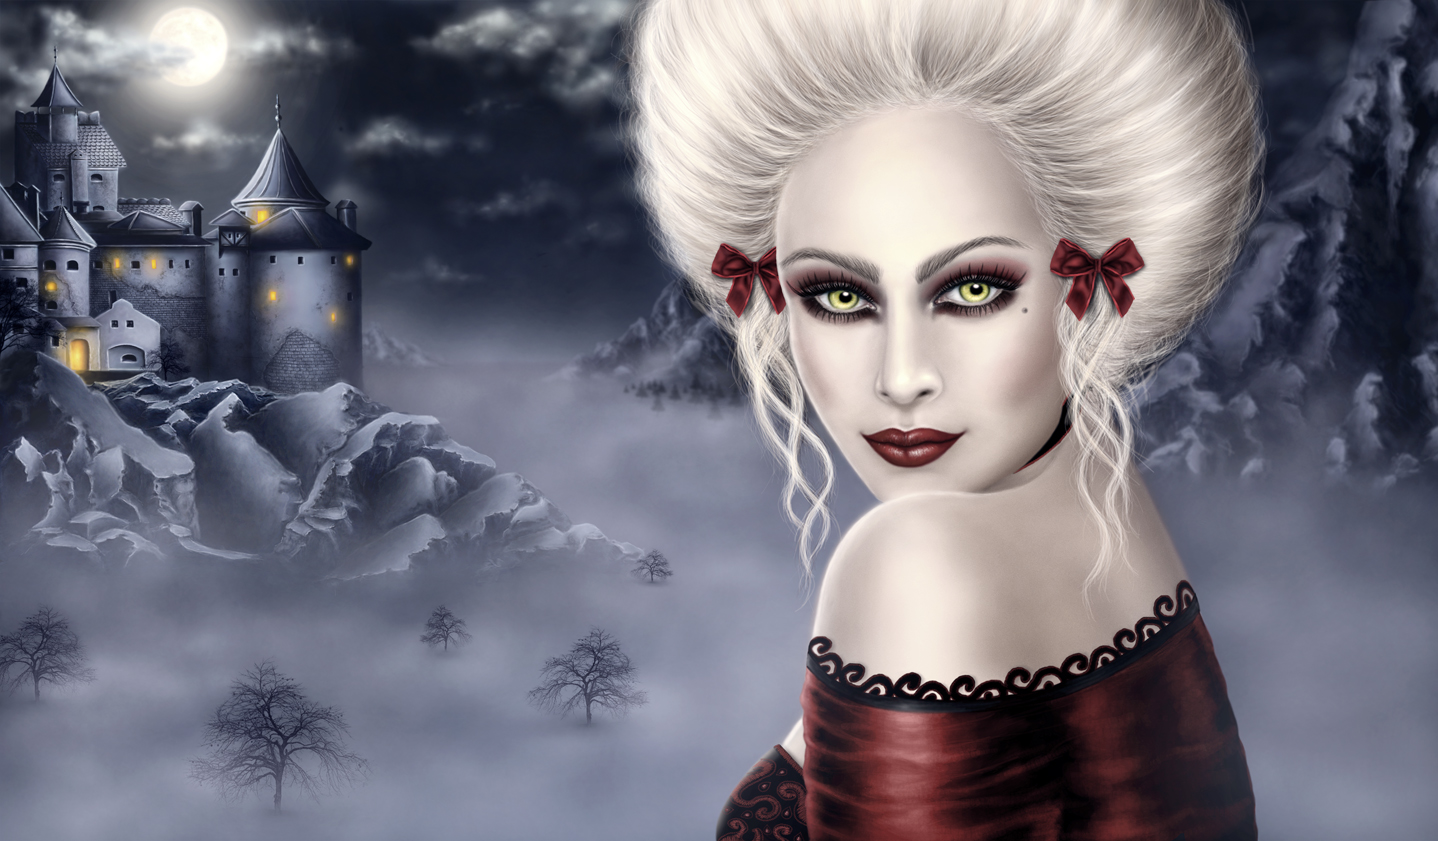 Countess by melica